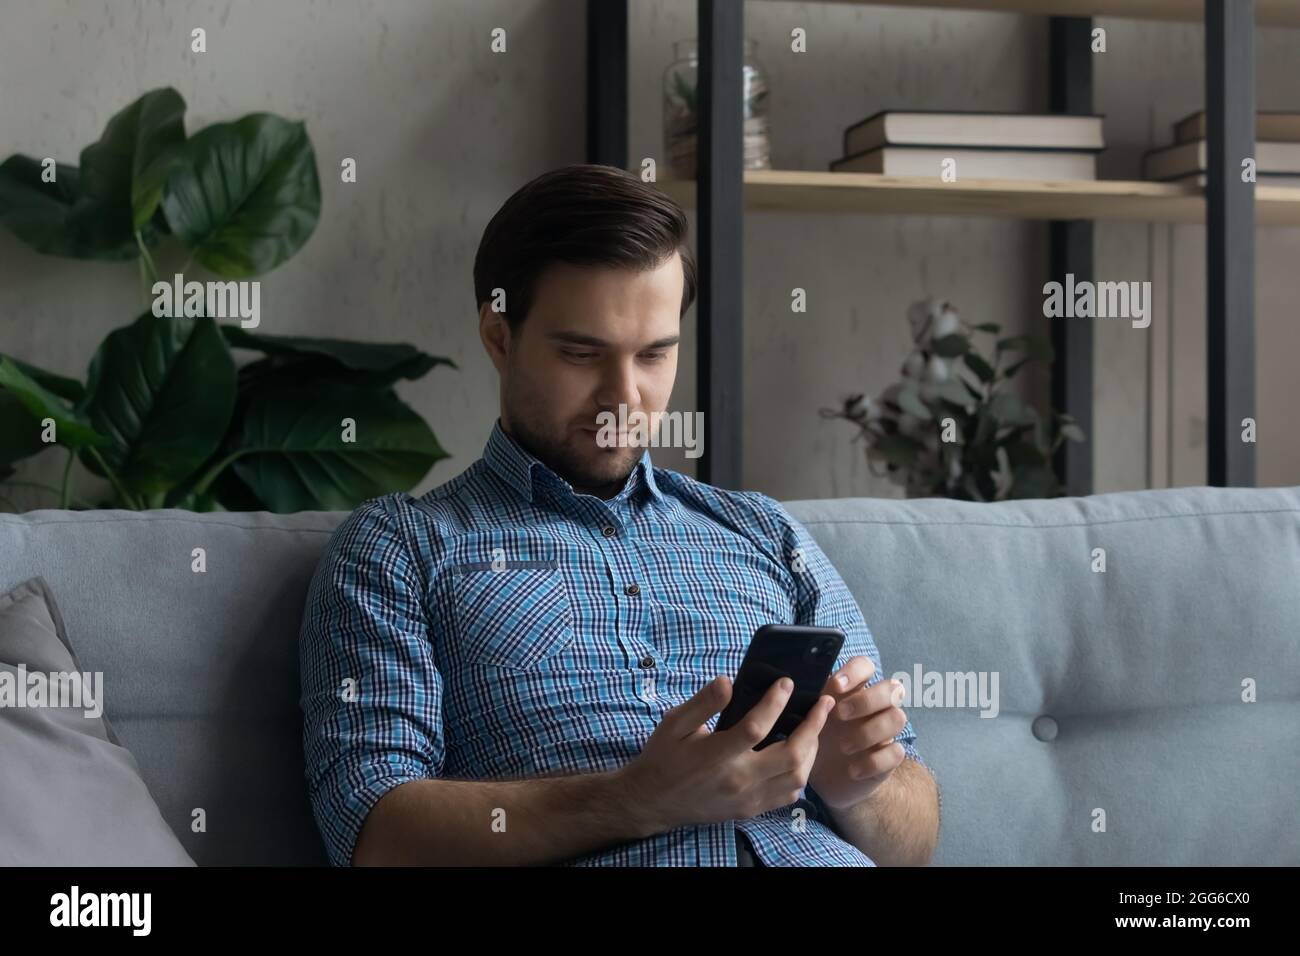 Serious mobile phone user reading text message on screen Stock Photo